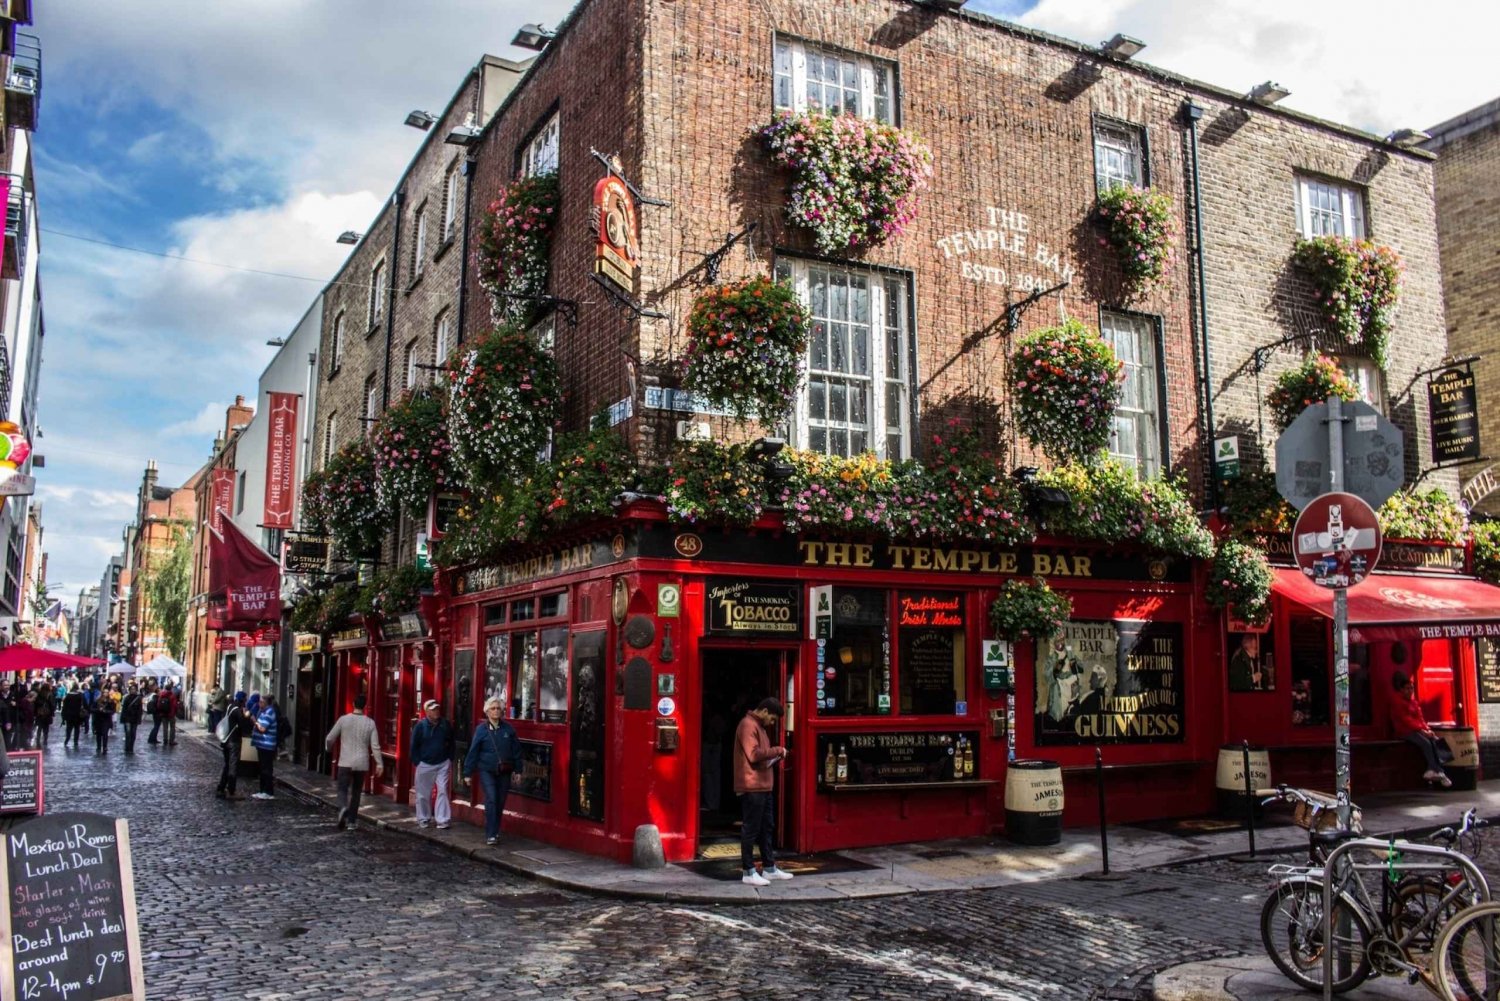 The Vikings in Dublin: Self-Guided Audio Tour in the City